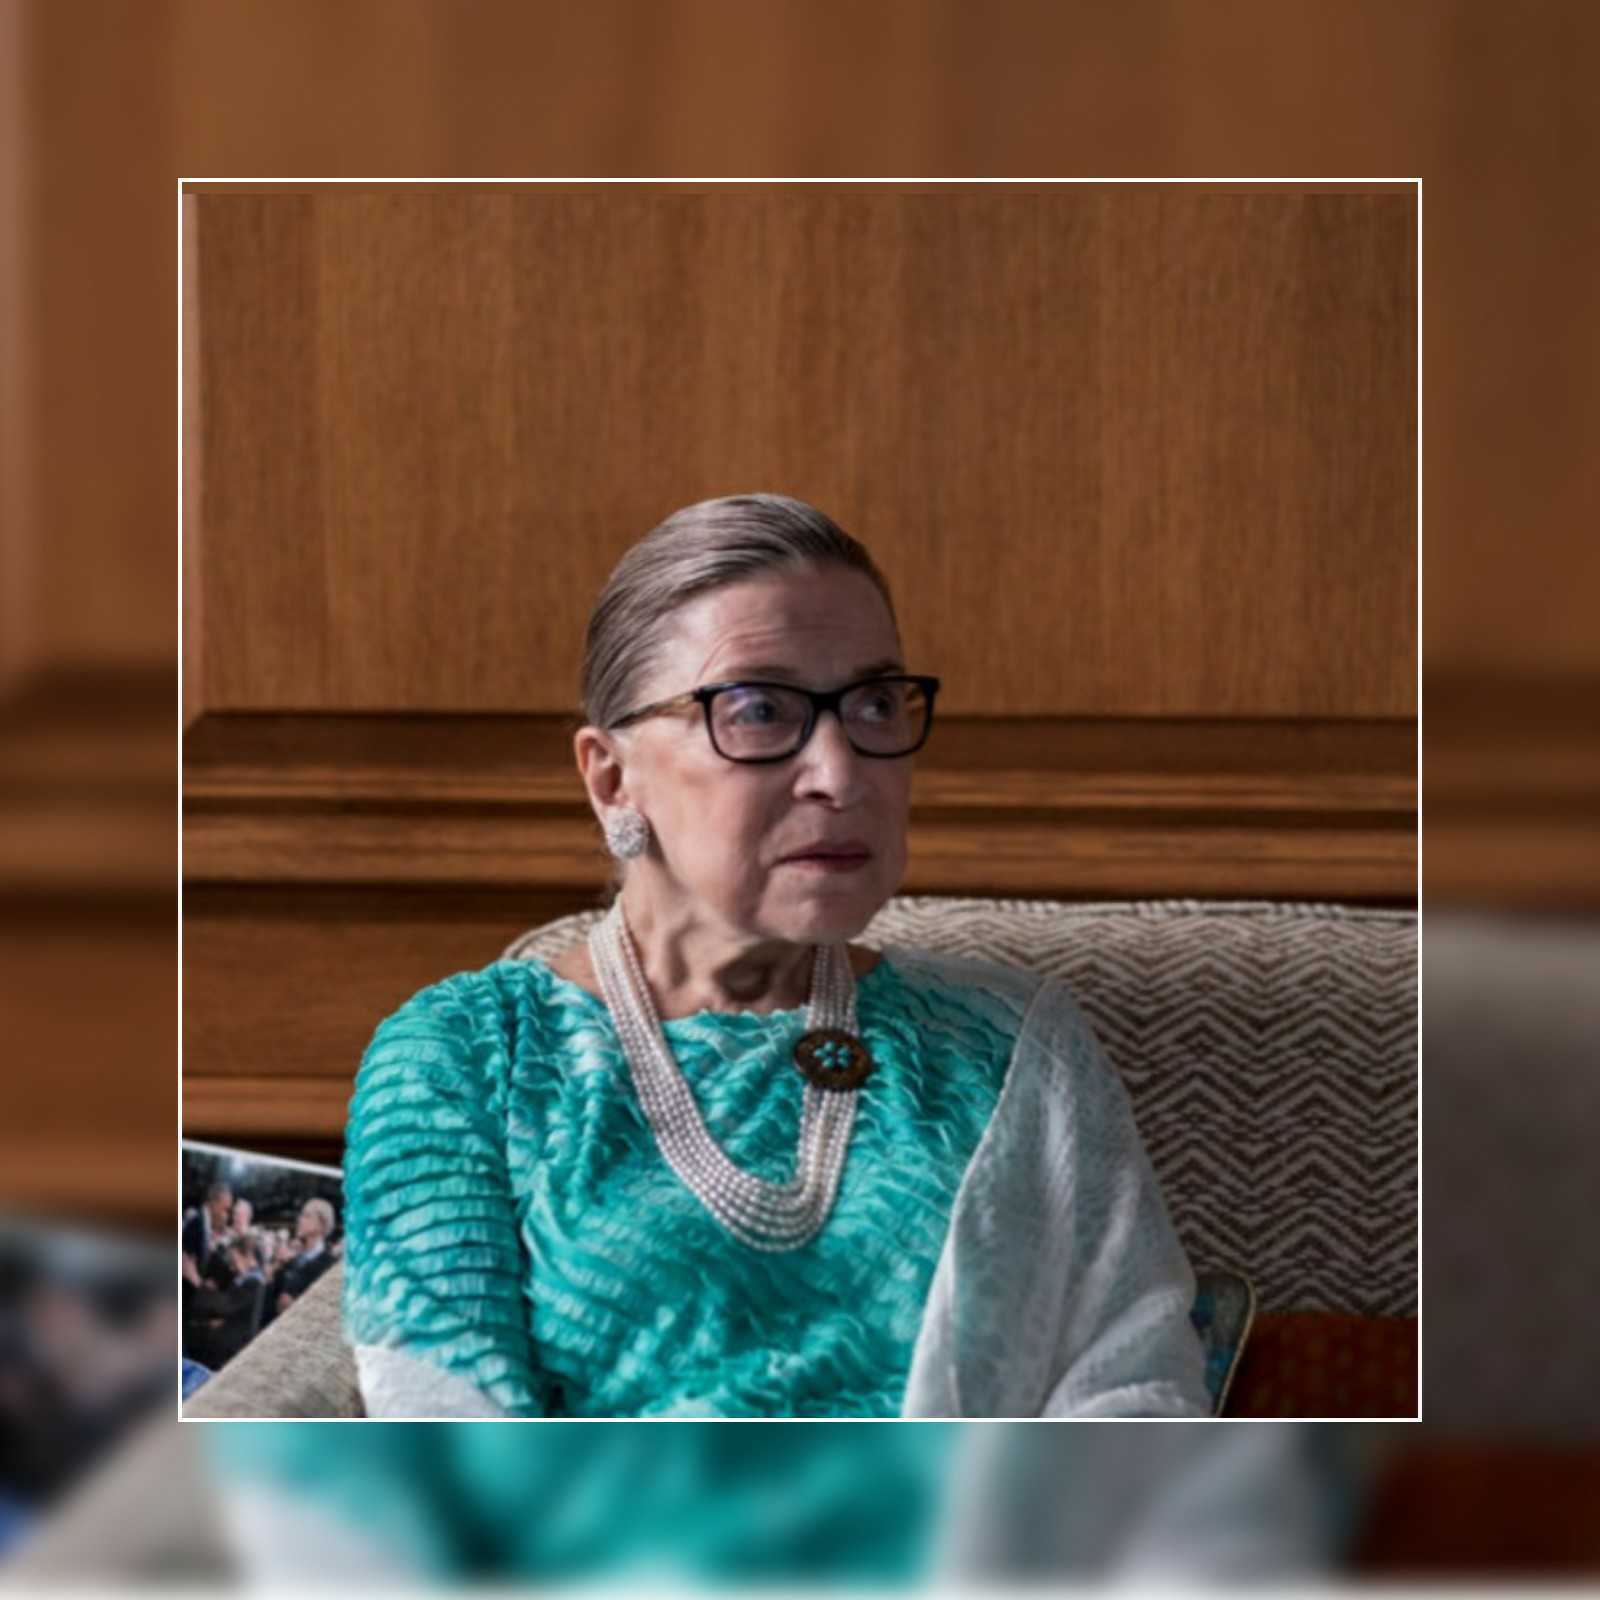  Justice Ruth Bader Ginsburg, Champion Of Gender Equality, Dies At 87